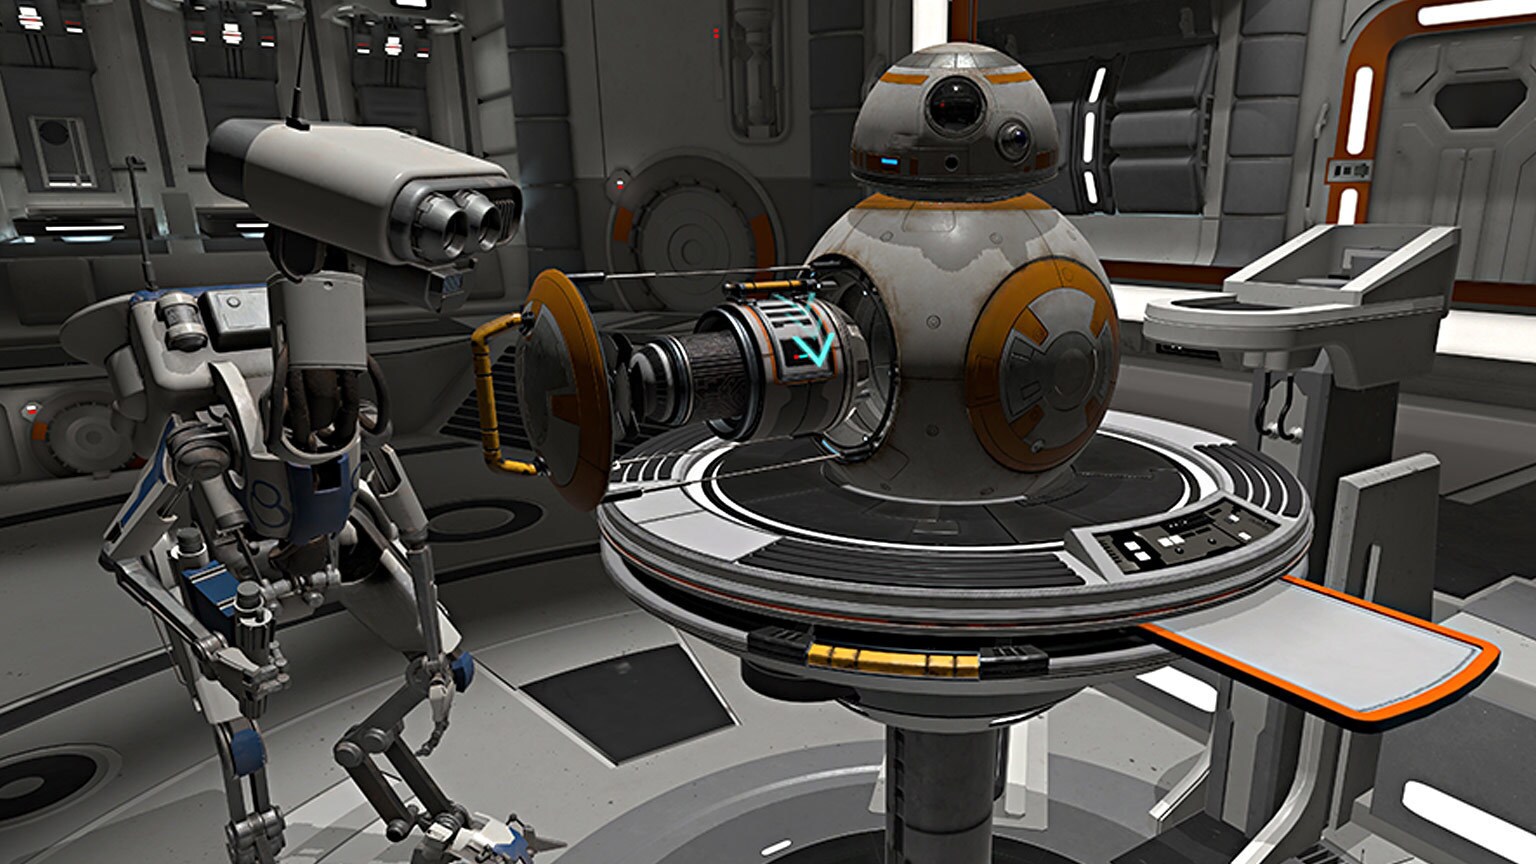 Become a Resistance Mechanic in the New VR Experience Star Wars: Droid Repair Bay